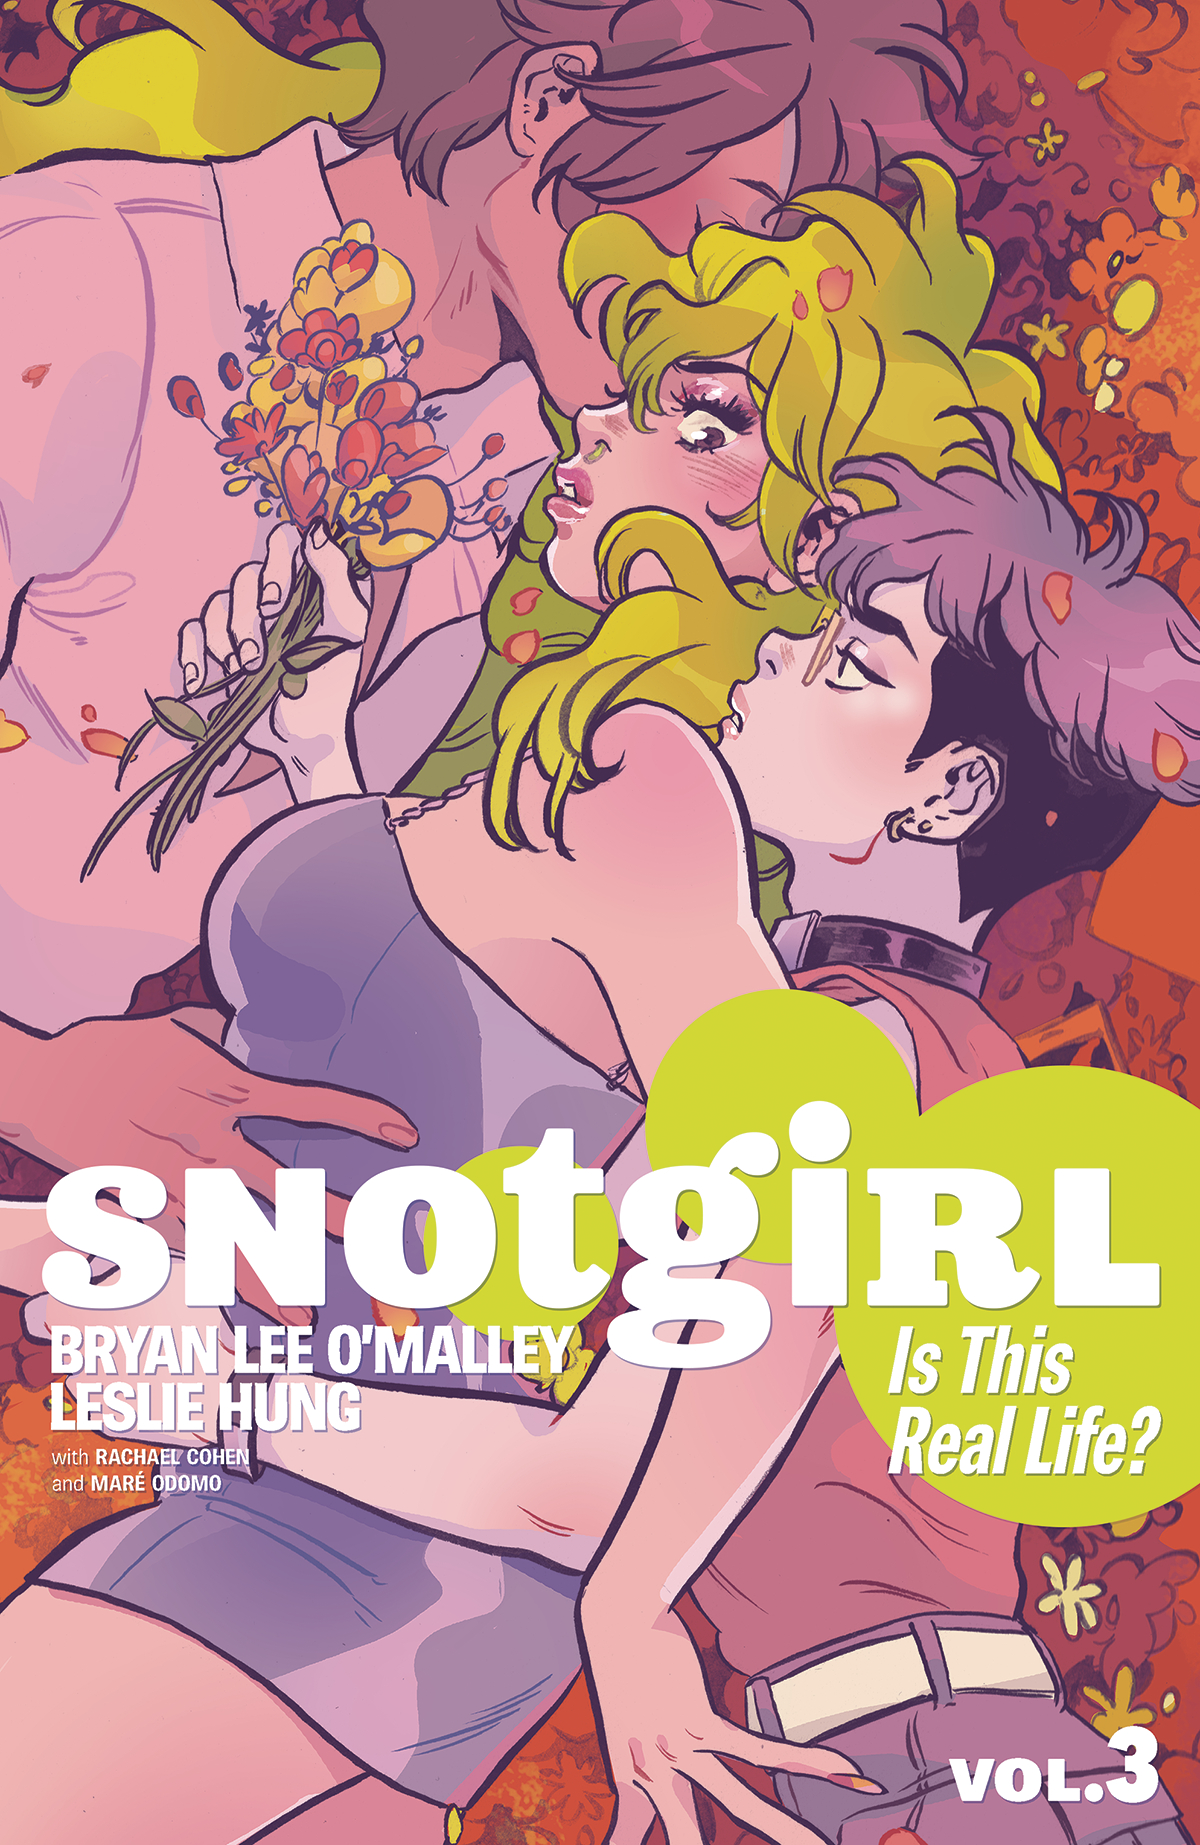 Snotgirl Graphic Novel Volume 3 Is This Real Life